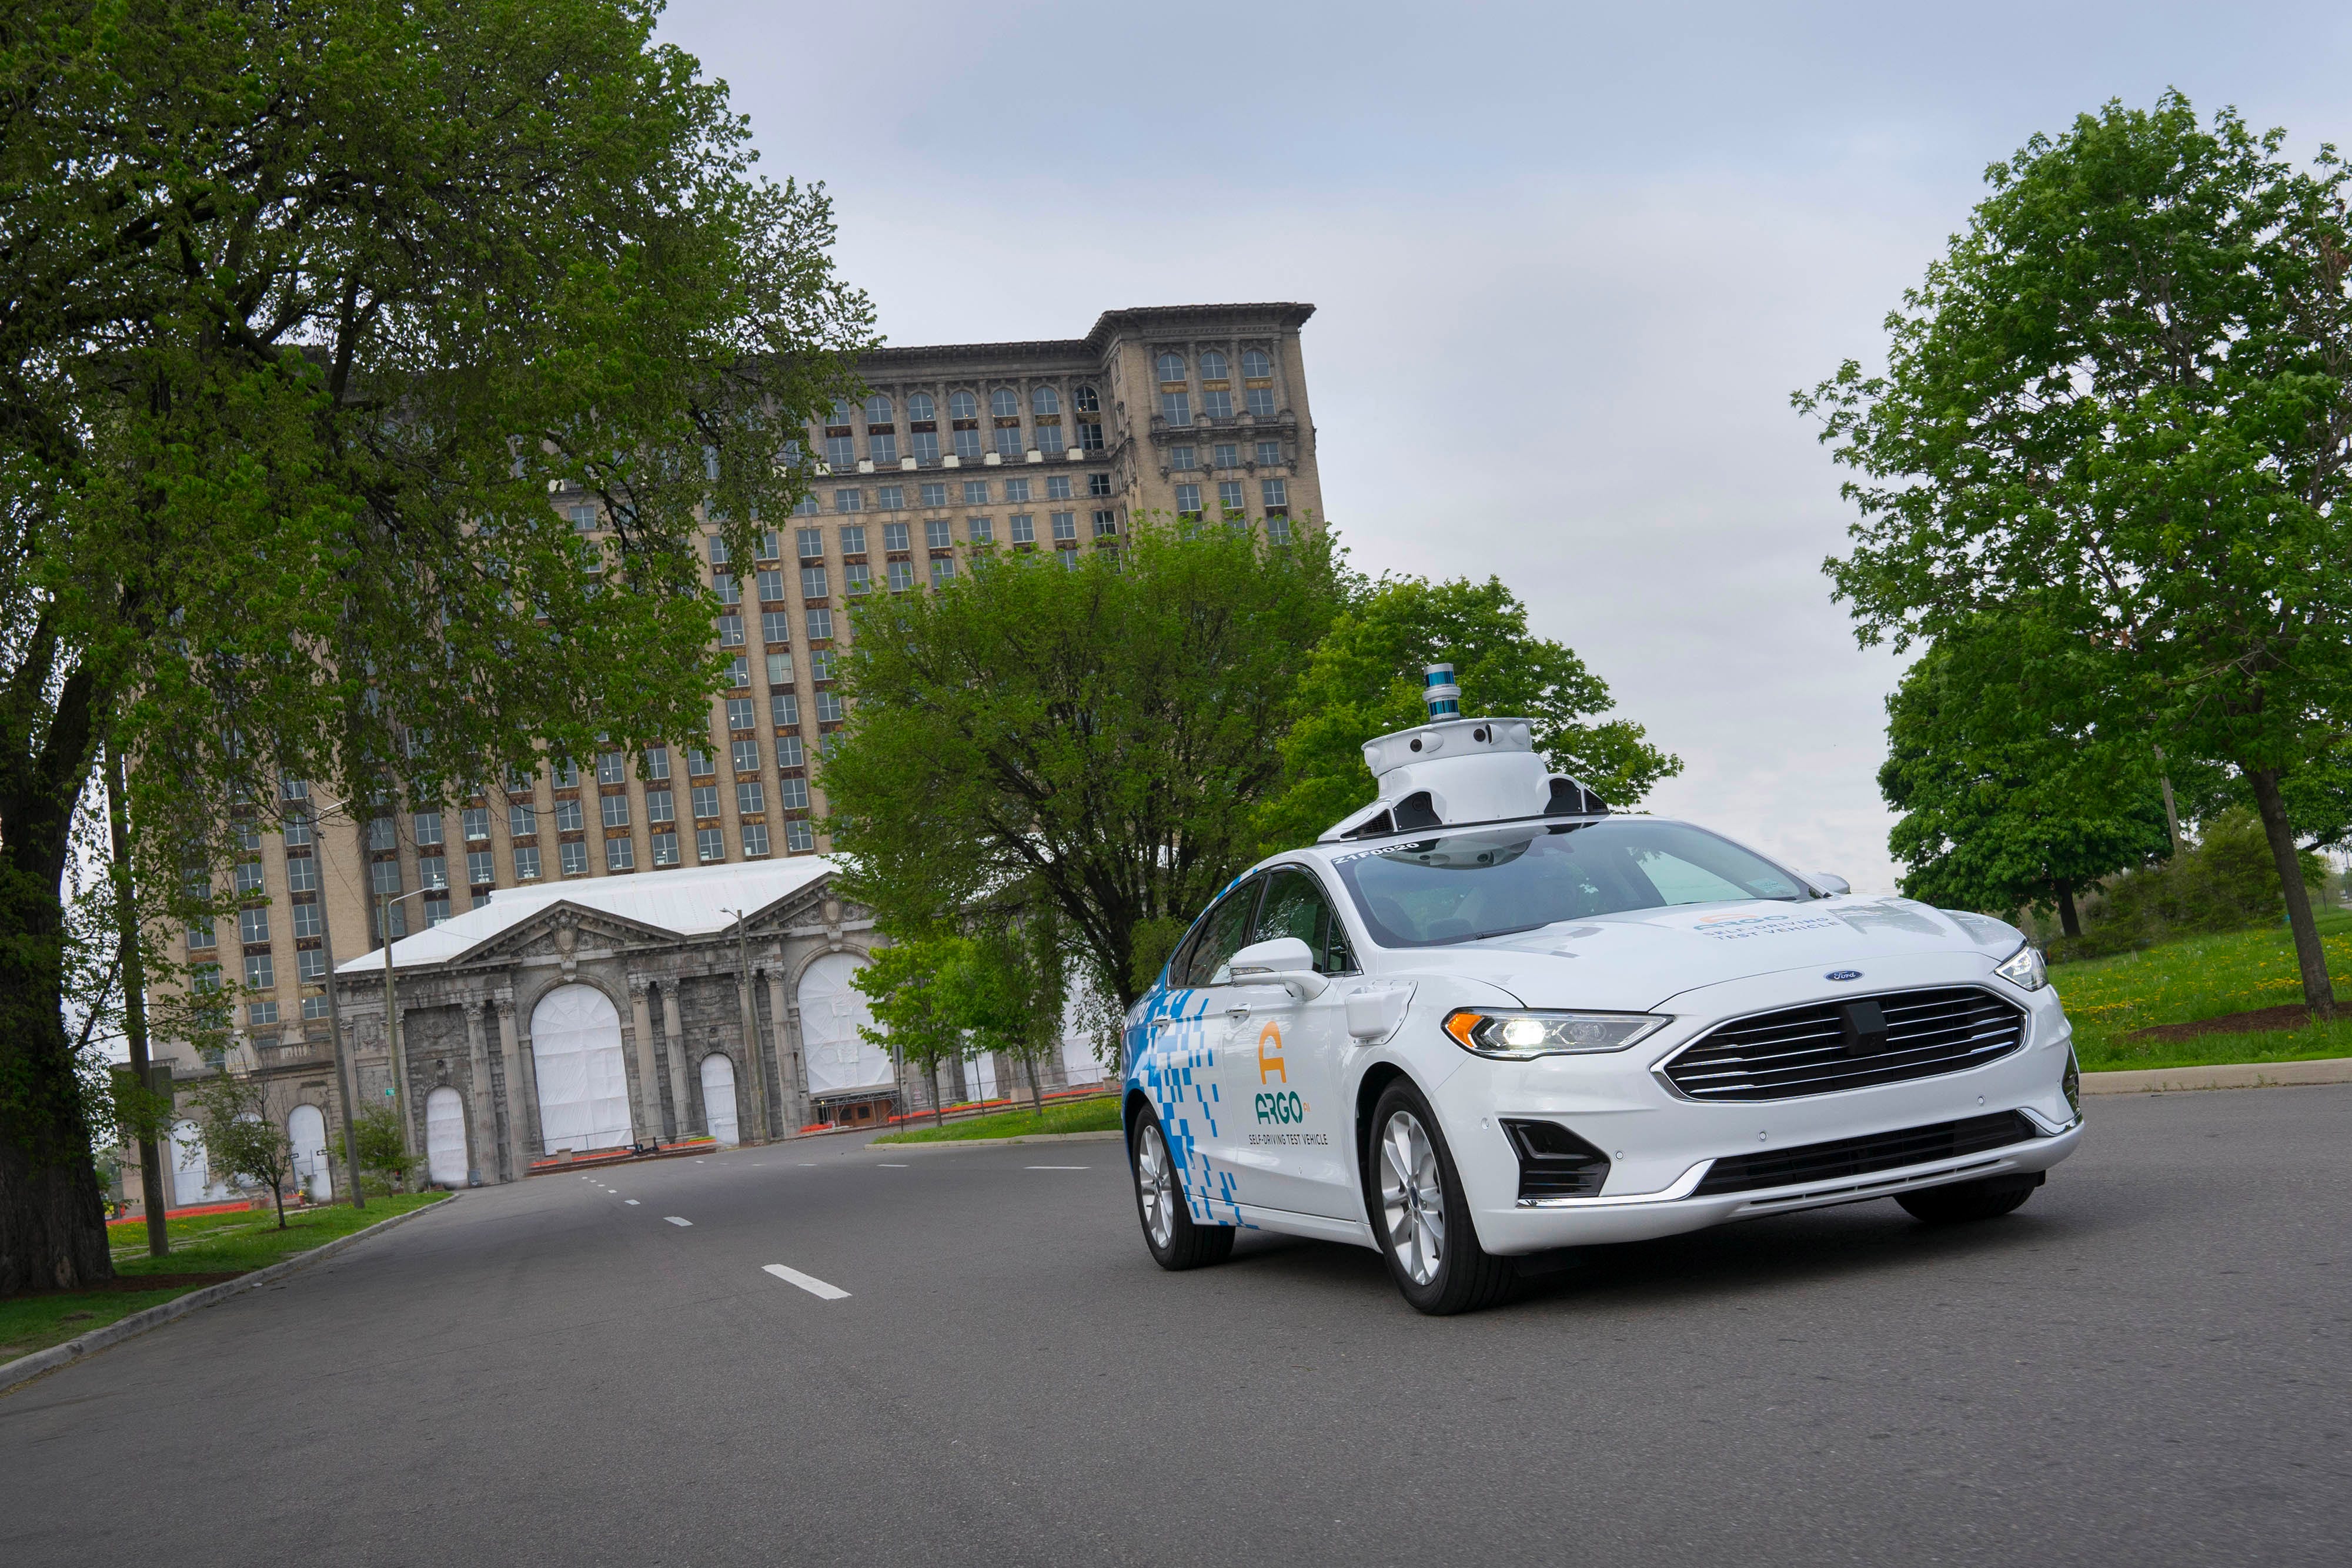 The new Ford Fusion Hybrid is a third-generation test vehicle that Argo AI is now deploying in collaboration with Ford in all five major cities of operation: Pittsburgh, Palo Alto, Miami, Washington and Detroit.